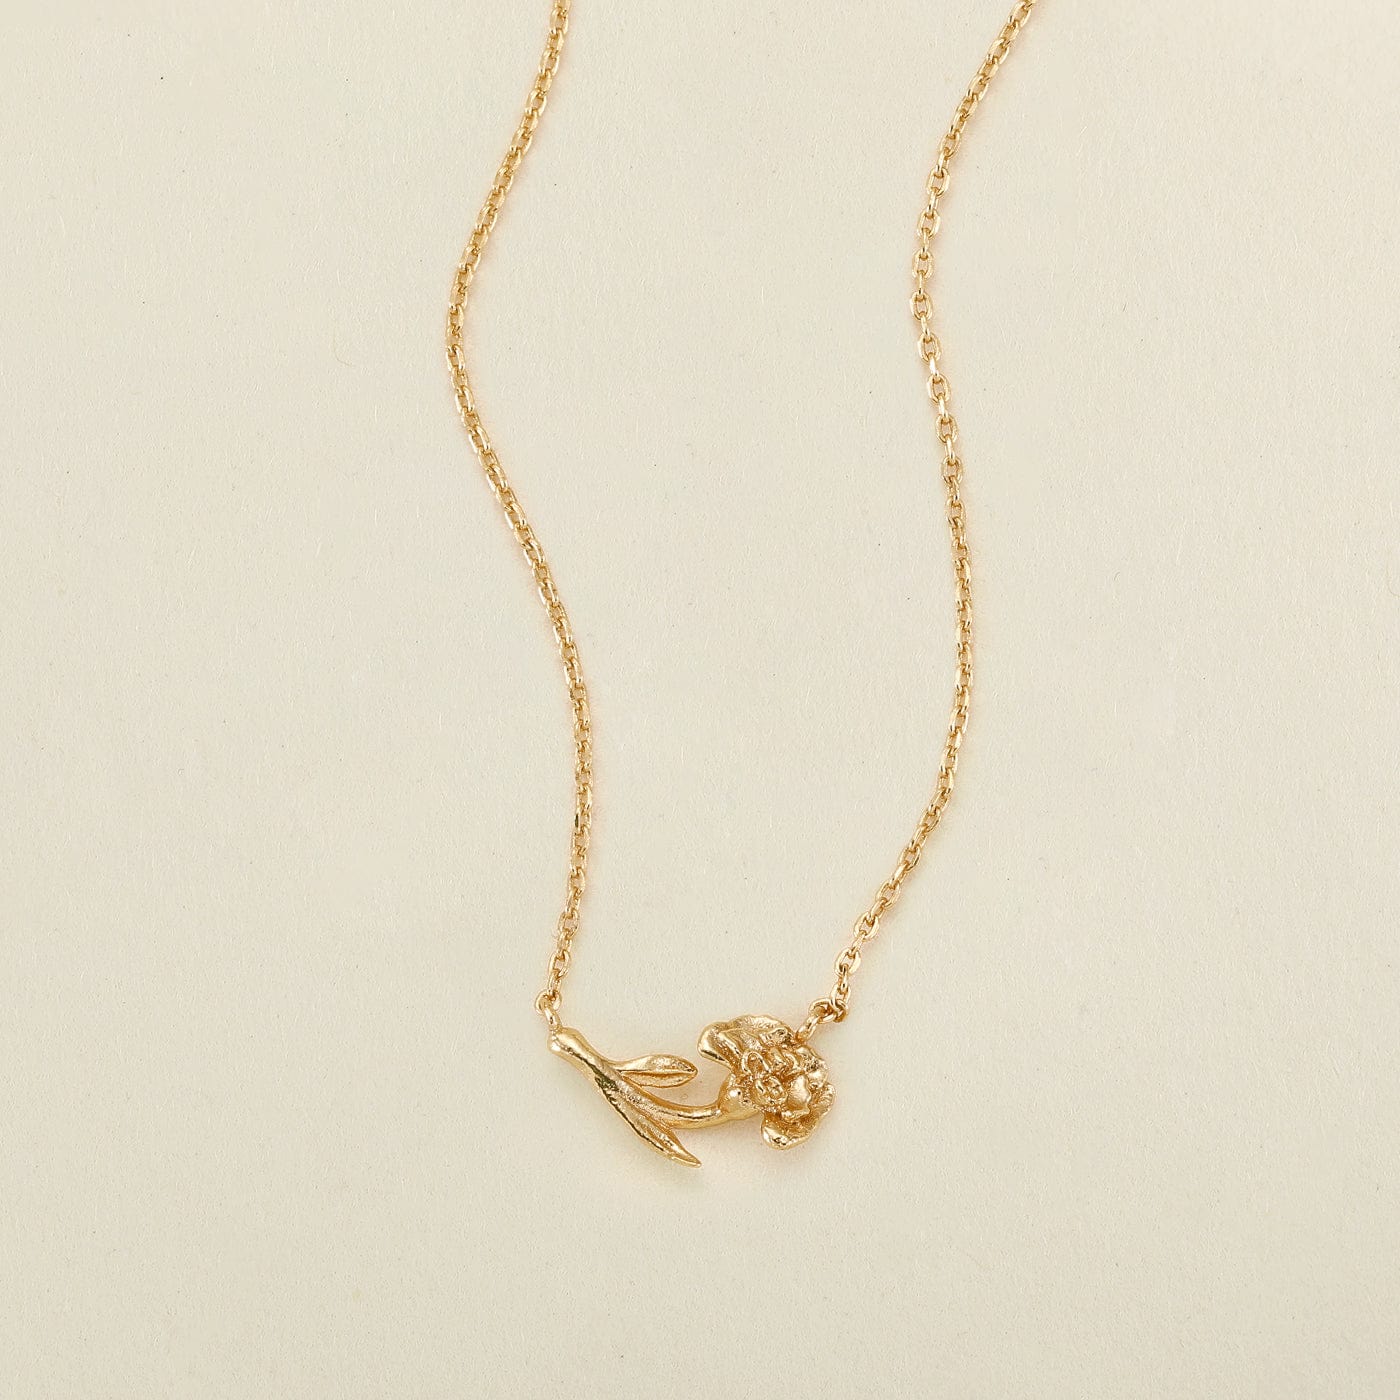 January Everbloom Birth Flower Necklace Gold Vermeil Necklace